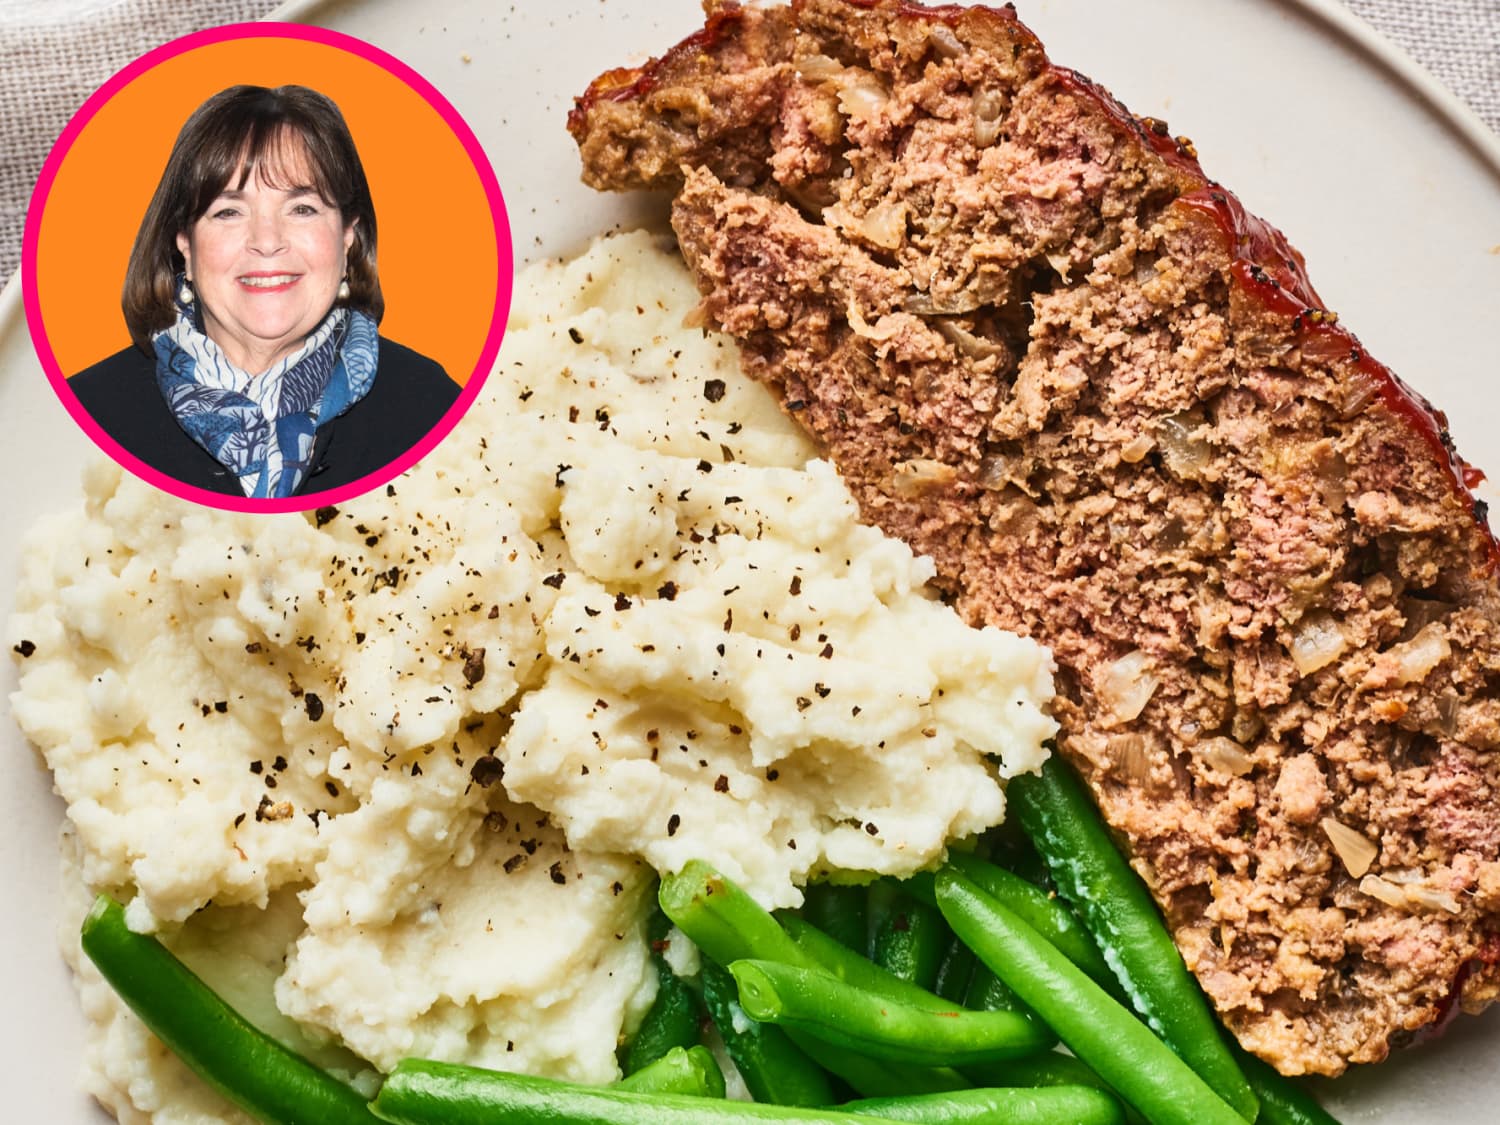 Here S Our Review Of Ina Garten S Meatloaf Recipe Kitchn,What Temp To Cook Pork Tenderloin